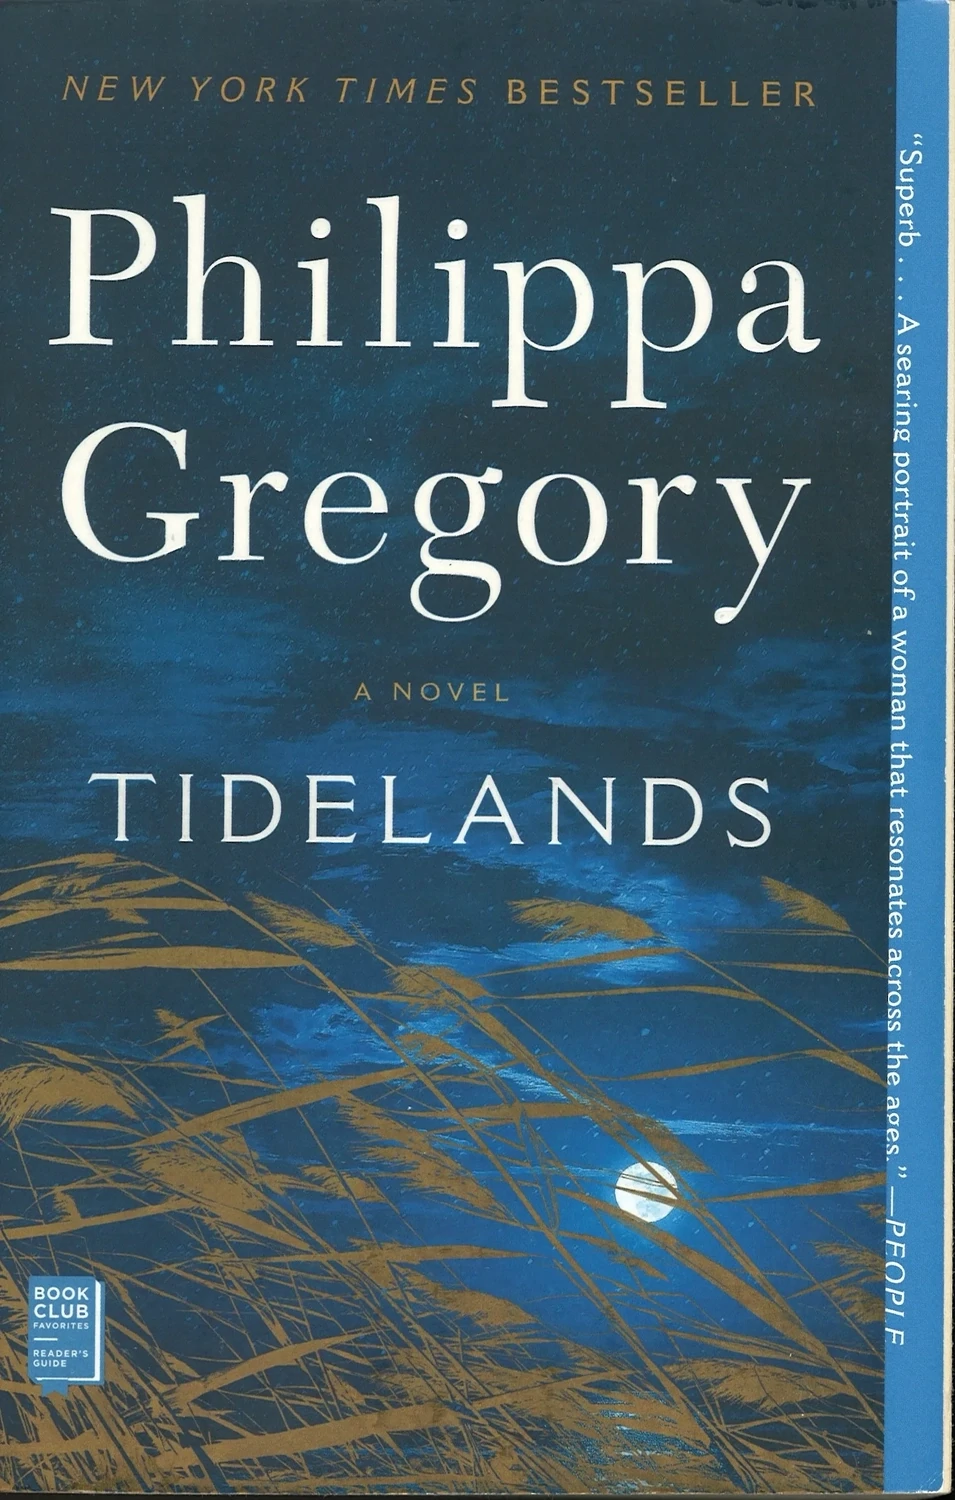 Tidelands (The Fairmile Series, Book 1) by Philippa Gregory